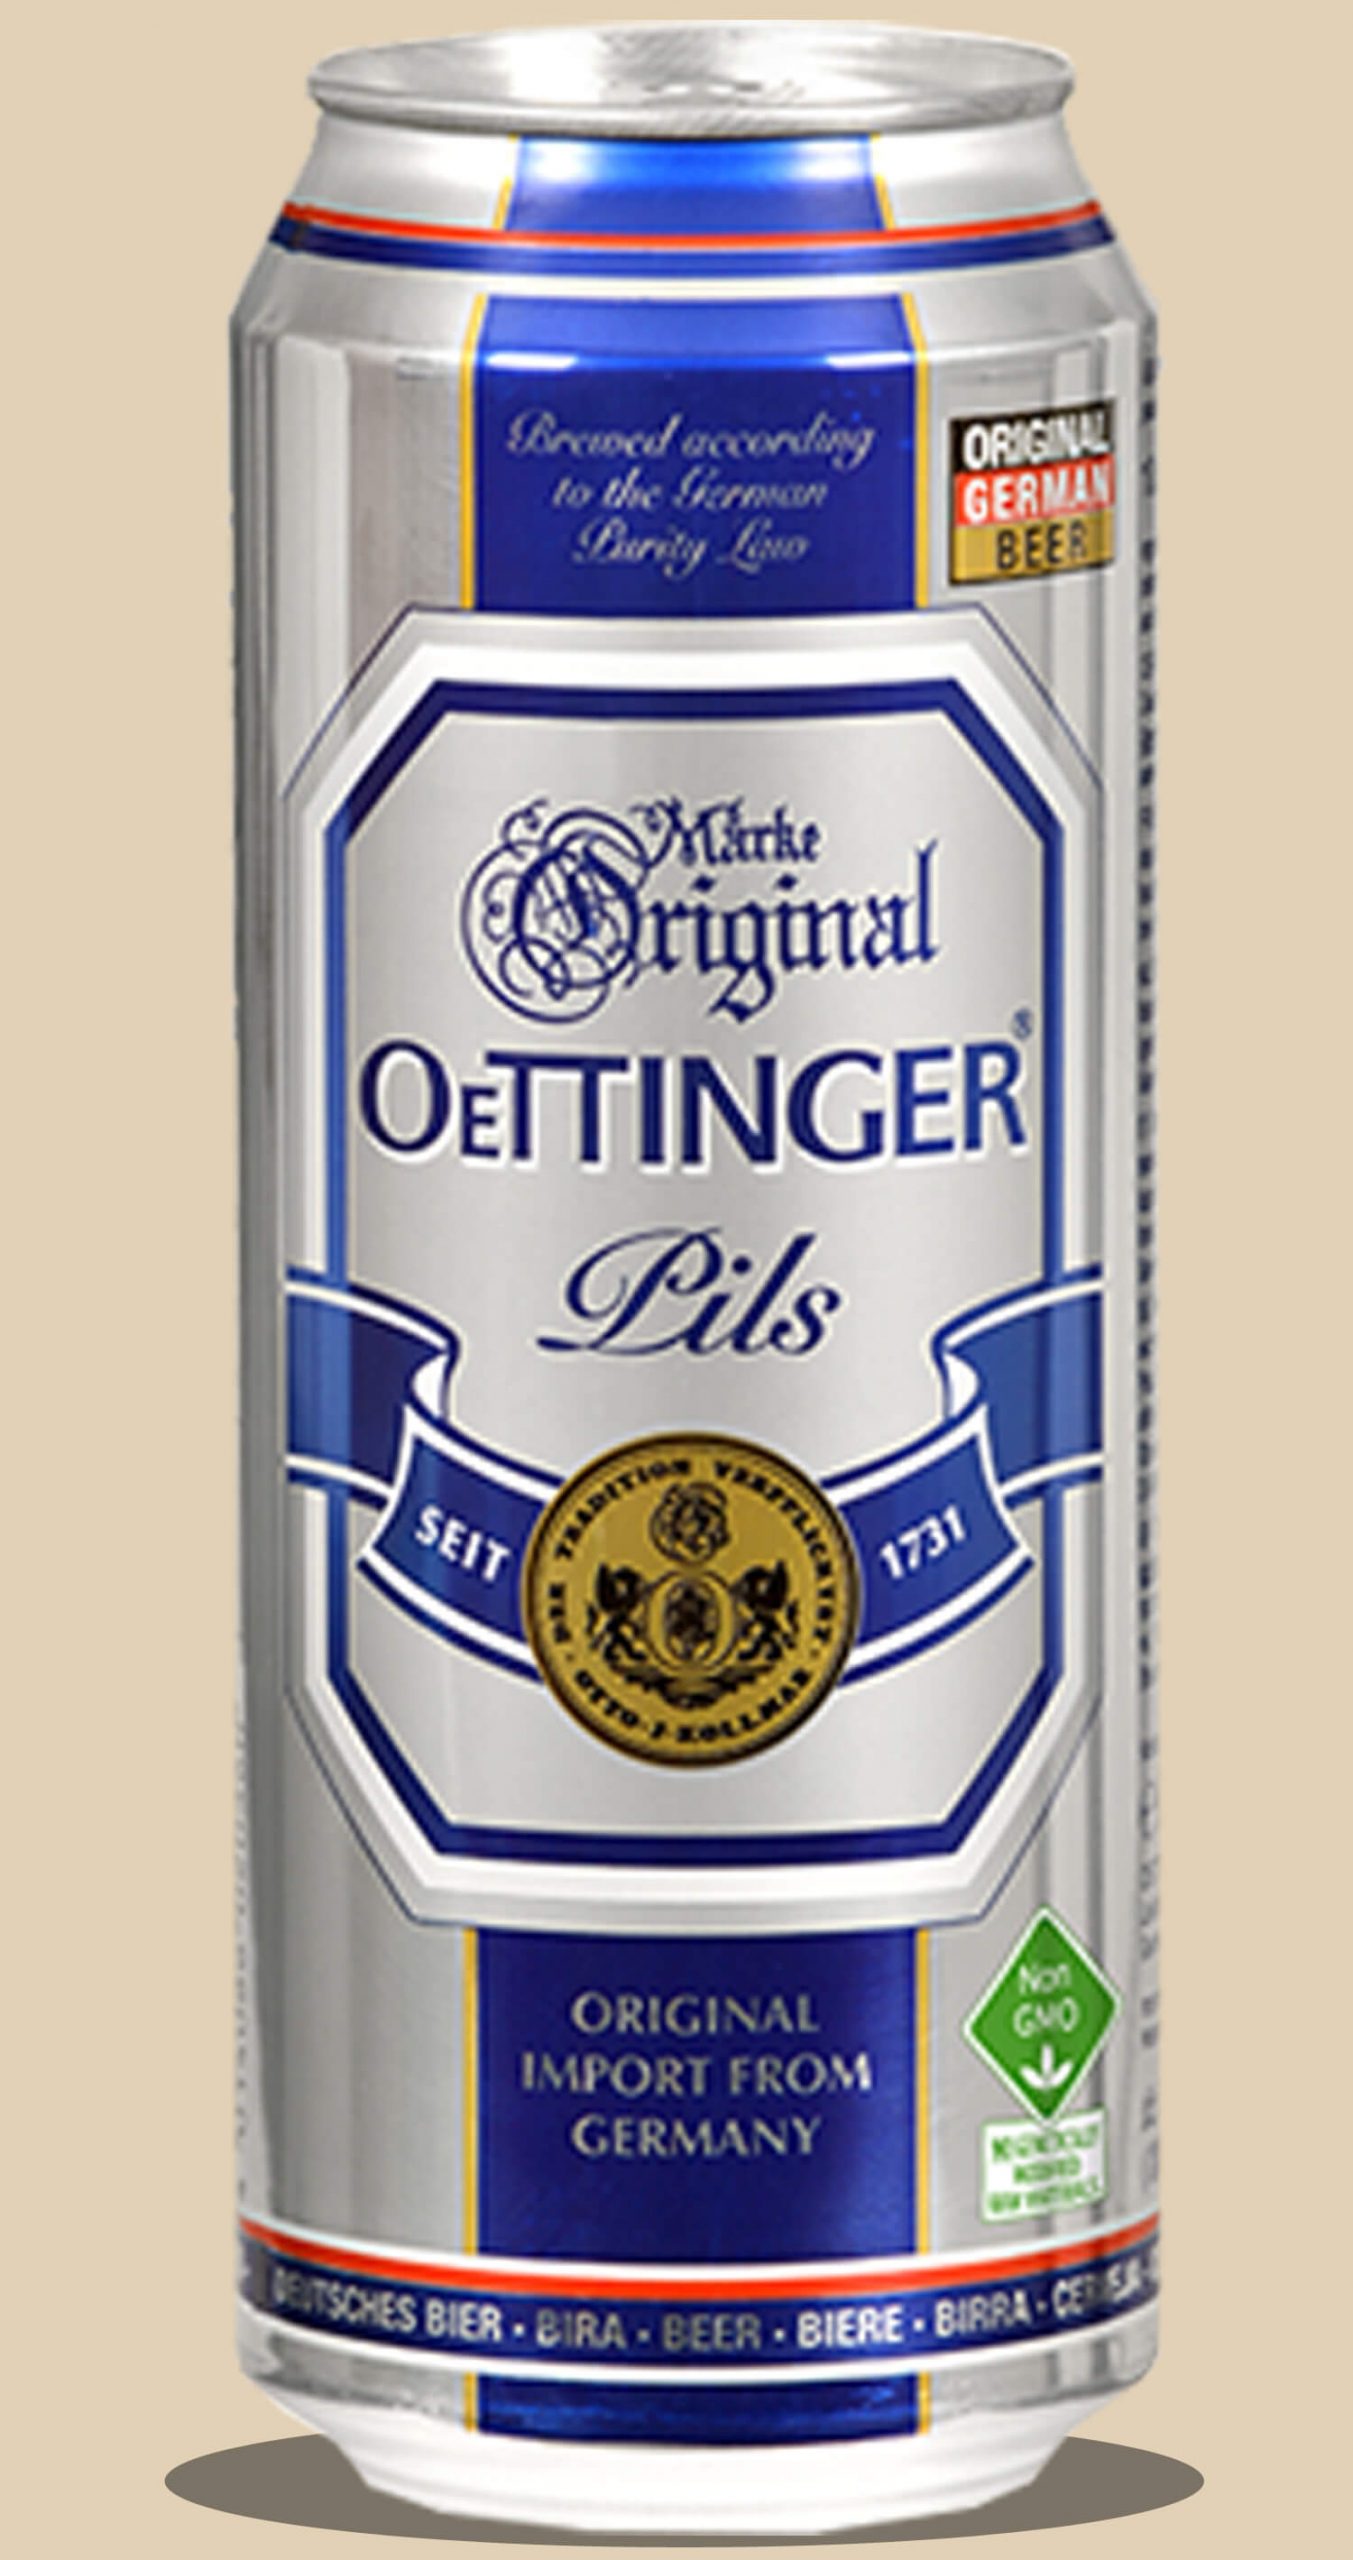 Oettinger Pils Cans 500mL - Dan Salmon A/S